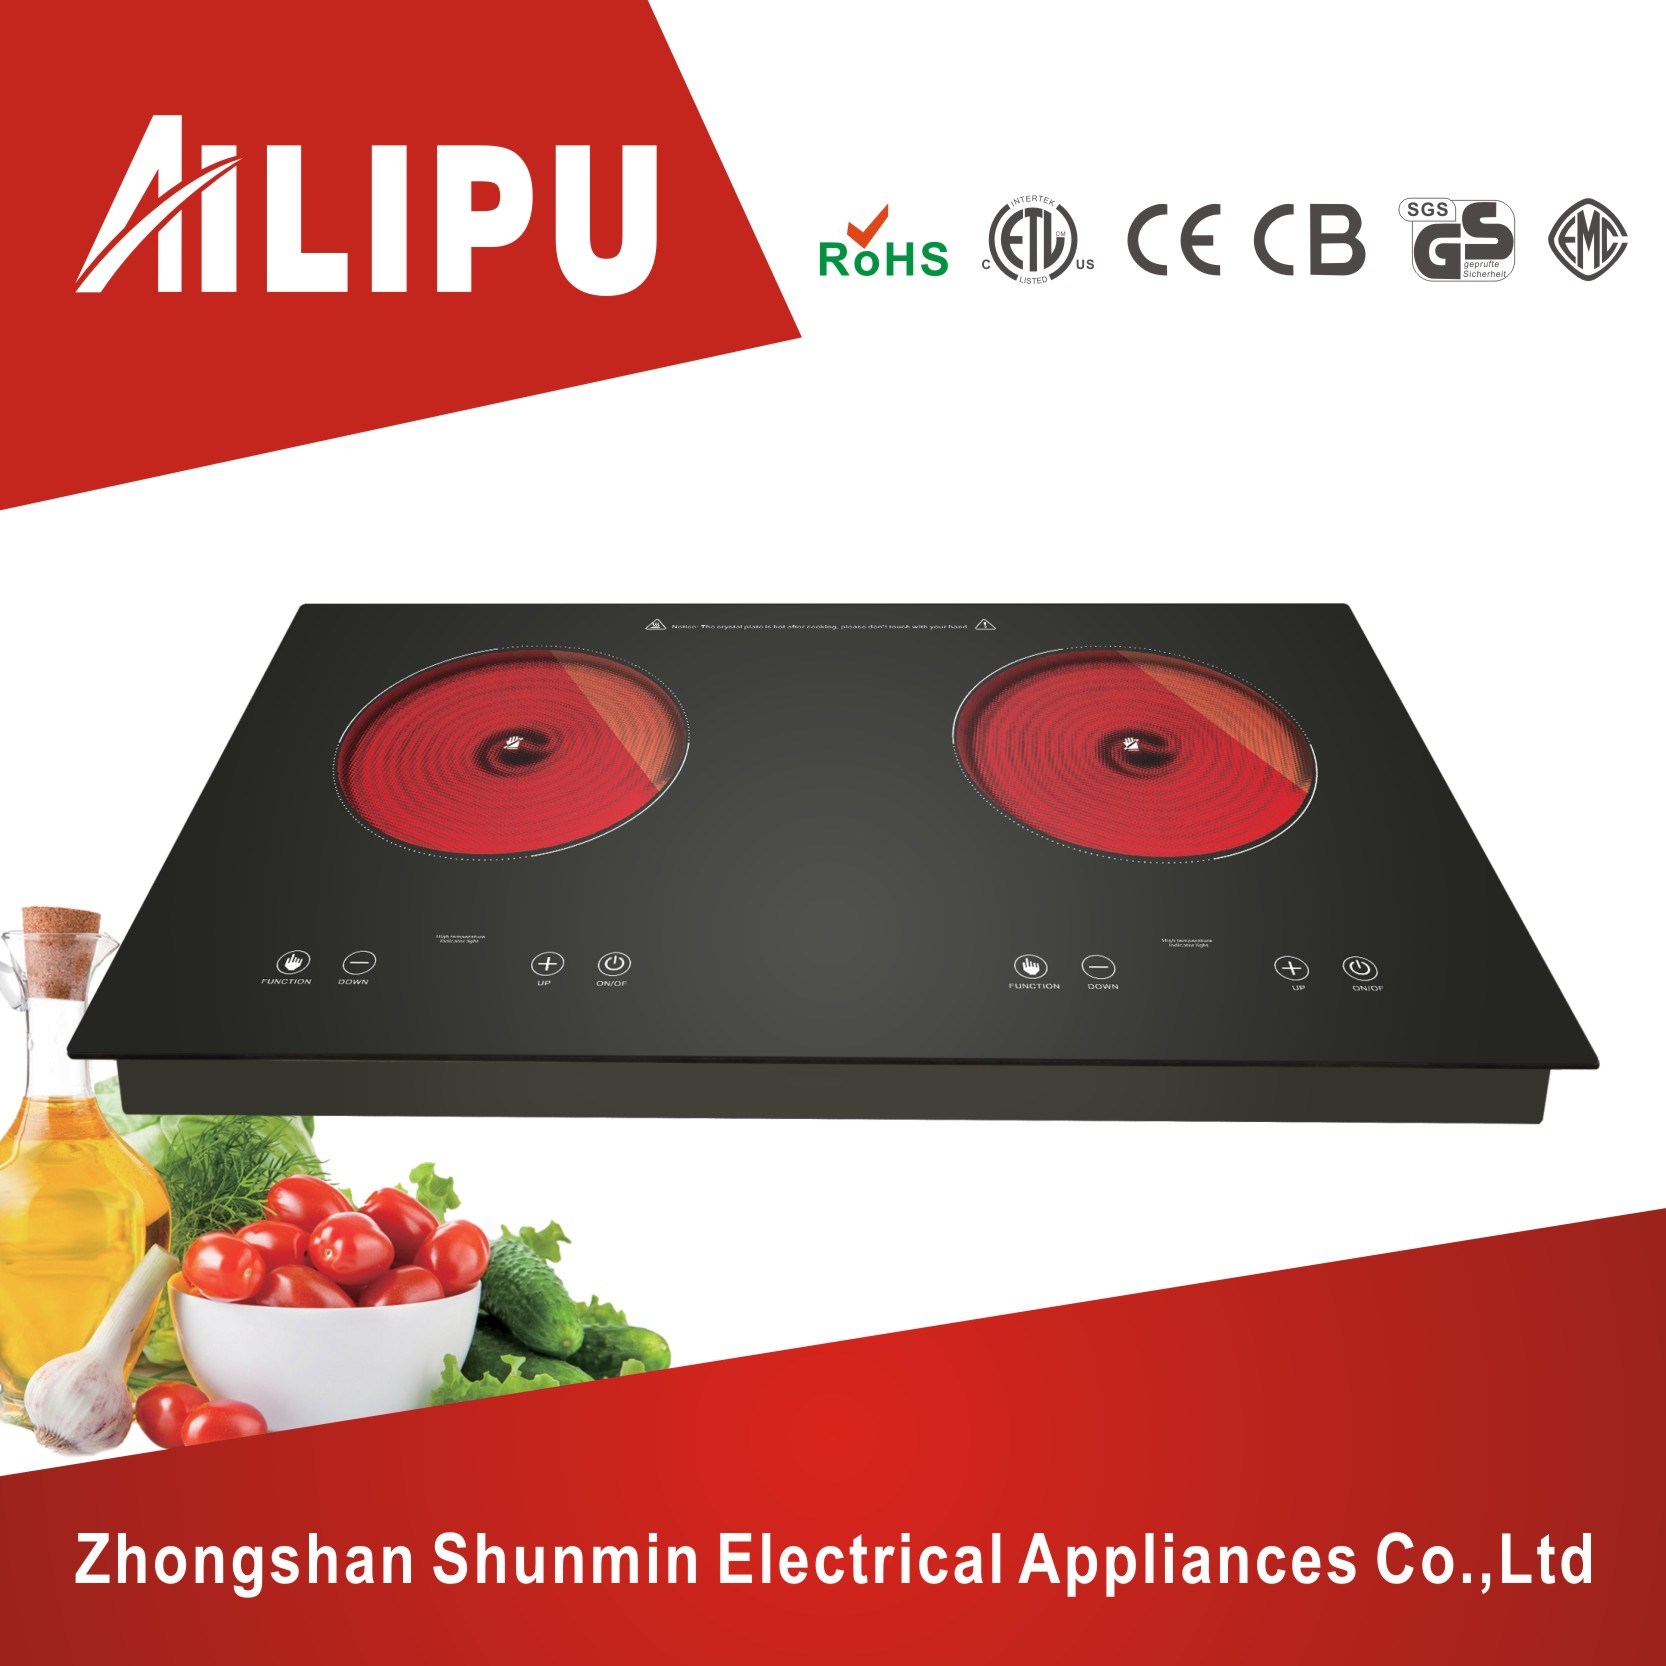 4kw Double Infrared Cooker/Two Burners Ceramic Hob/Double Hotplate Electric Cooktop/Kitchen Appliance